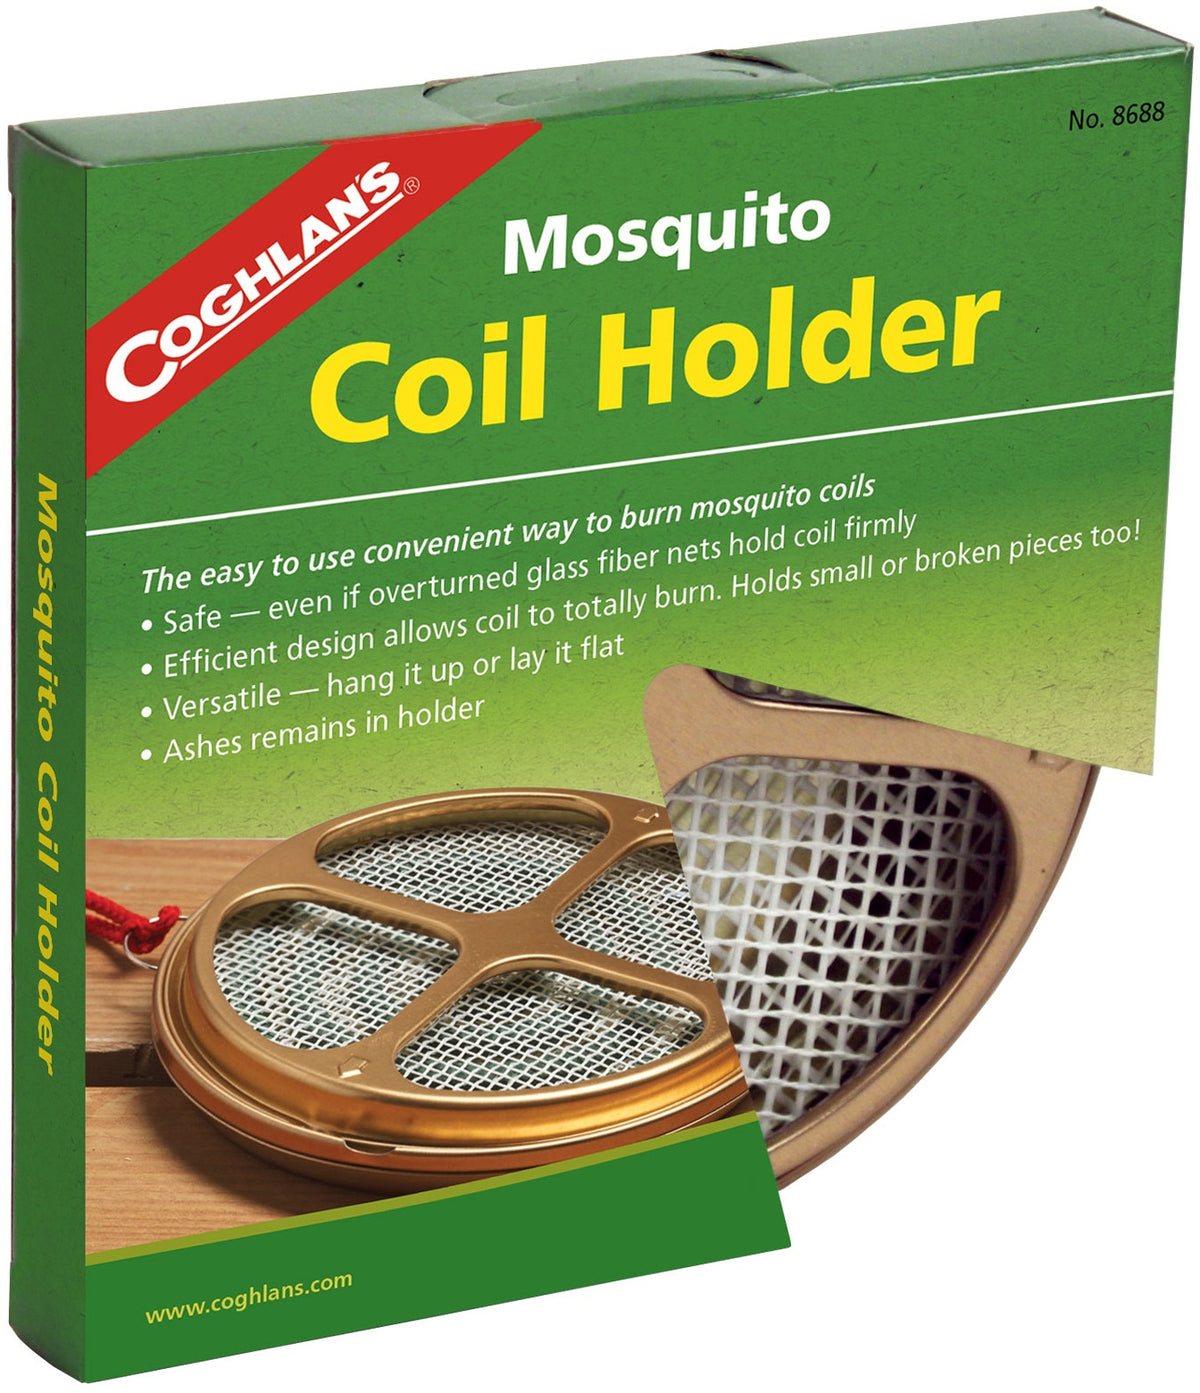 Buy coghlan's mosquito coil holder - Online store for marine, hunting & camping, camping accessories in USA, on sale, low price, discount deals, coupon code